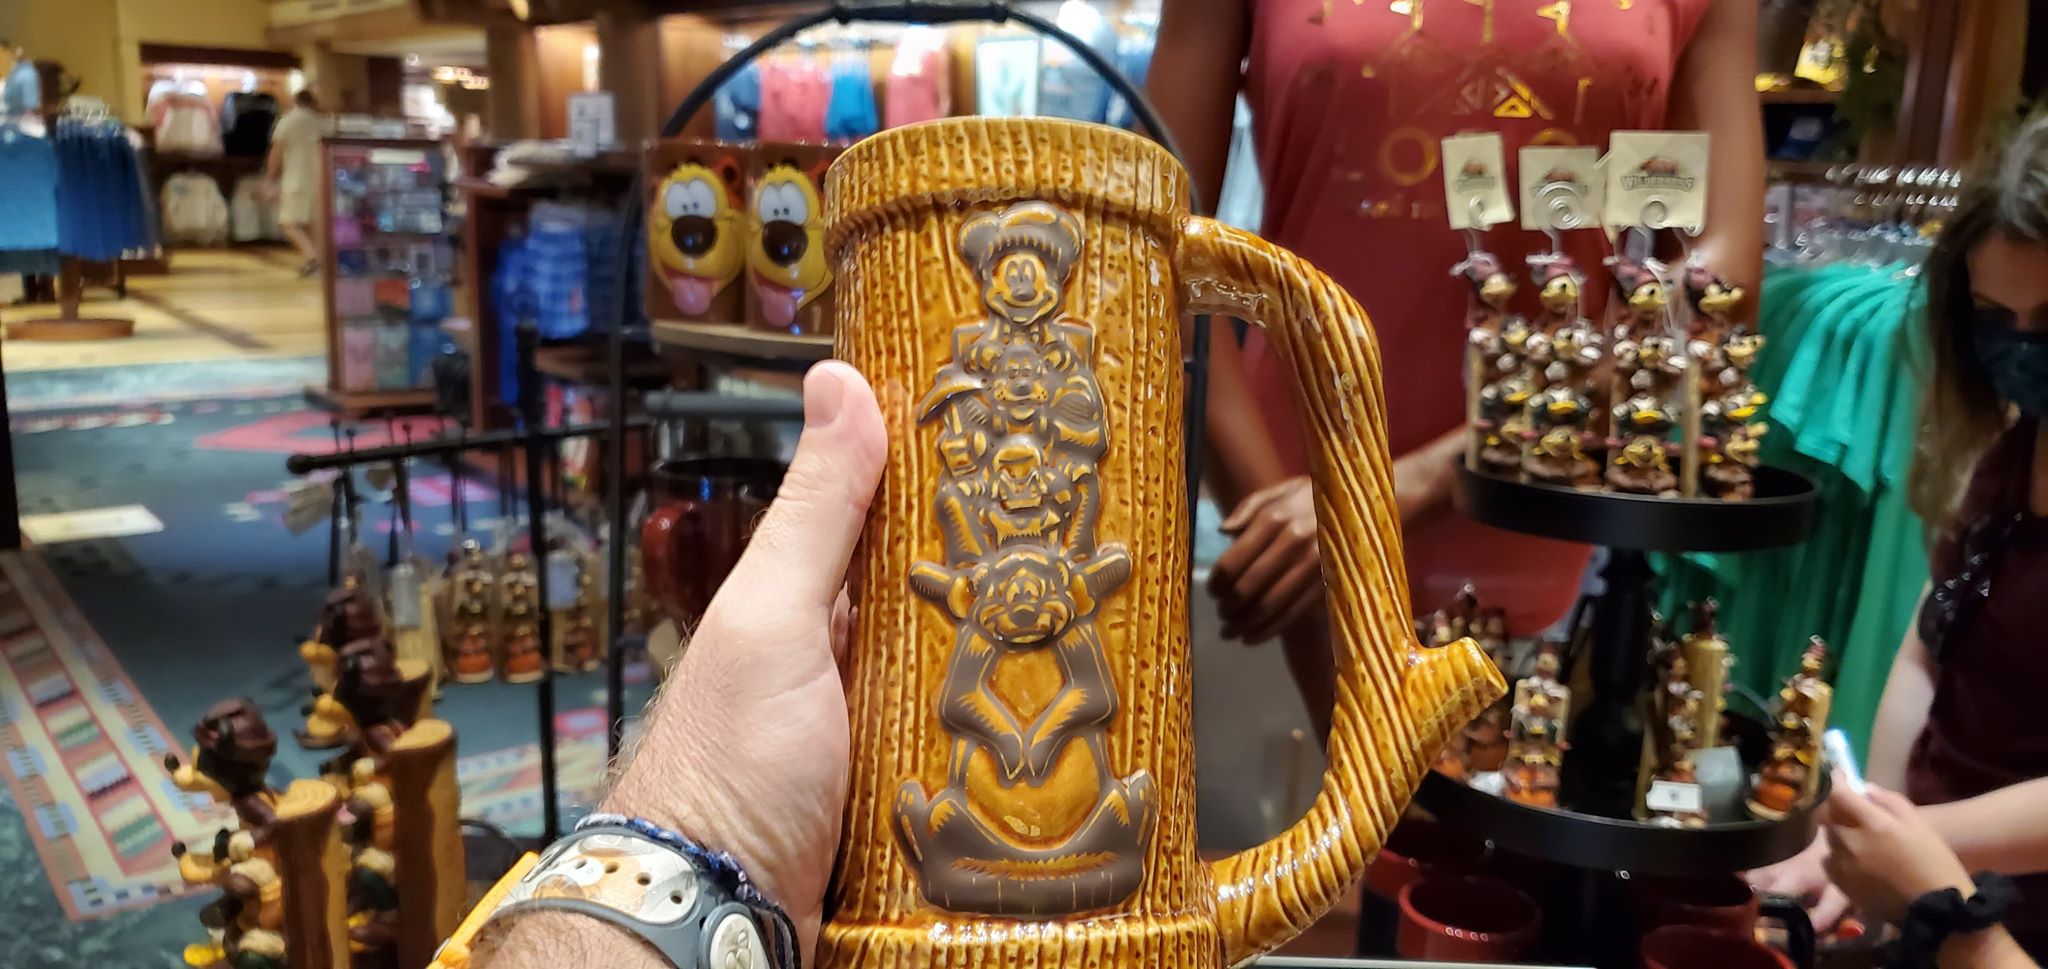 New Wilderness Lodge Mug Is A Rustic Way To Start The Day